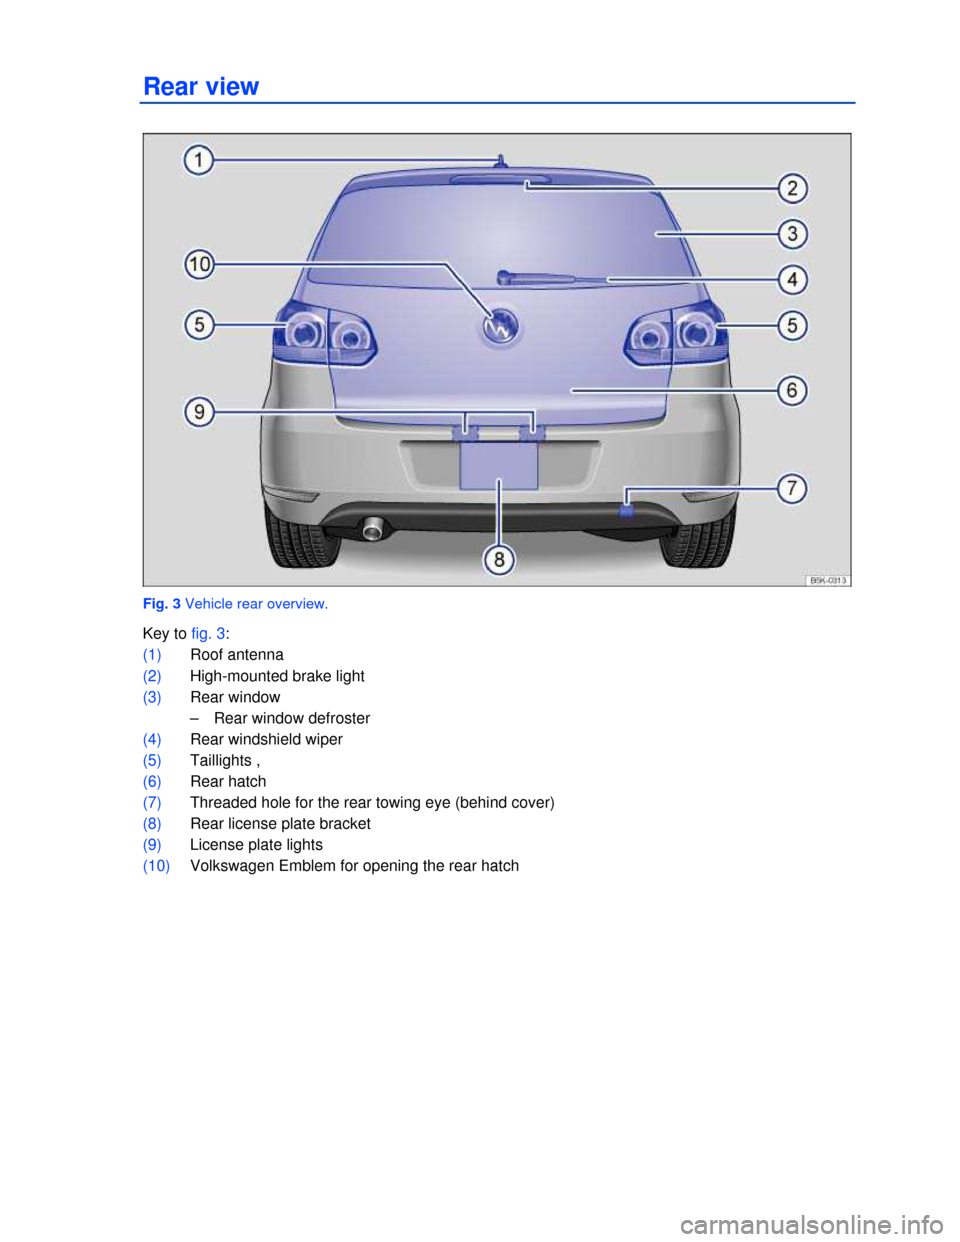 VOLKSWAGEN GOLF 2013 5G / 7.G Owners Manual  
 
Rear view 
 
Fig. 3 Vehicle rear overview. 
Key to fig. 3: 
(1) Roof antenna  
(2) High-mounted brake light 
(3) Rear window 
–  Rear window defroster  
(4) Rear windshield wiper  
(5) Taillight